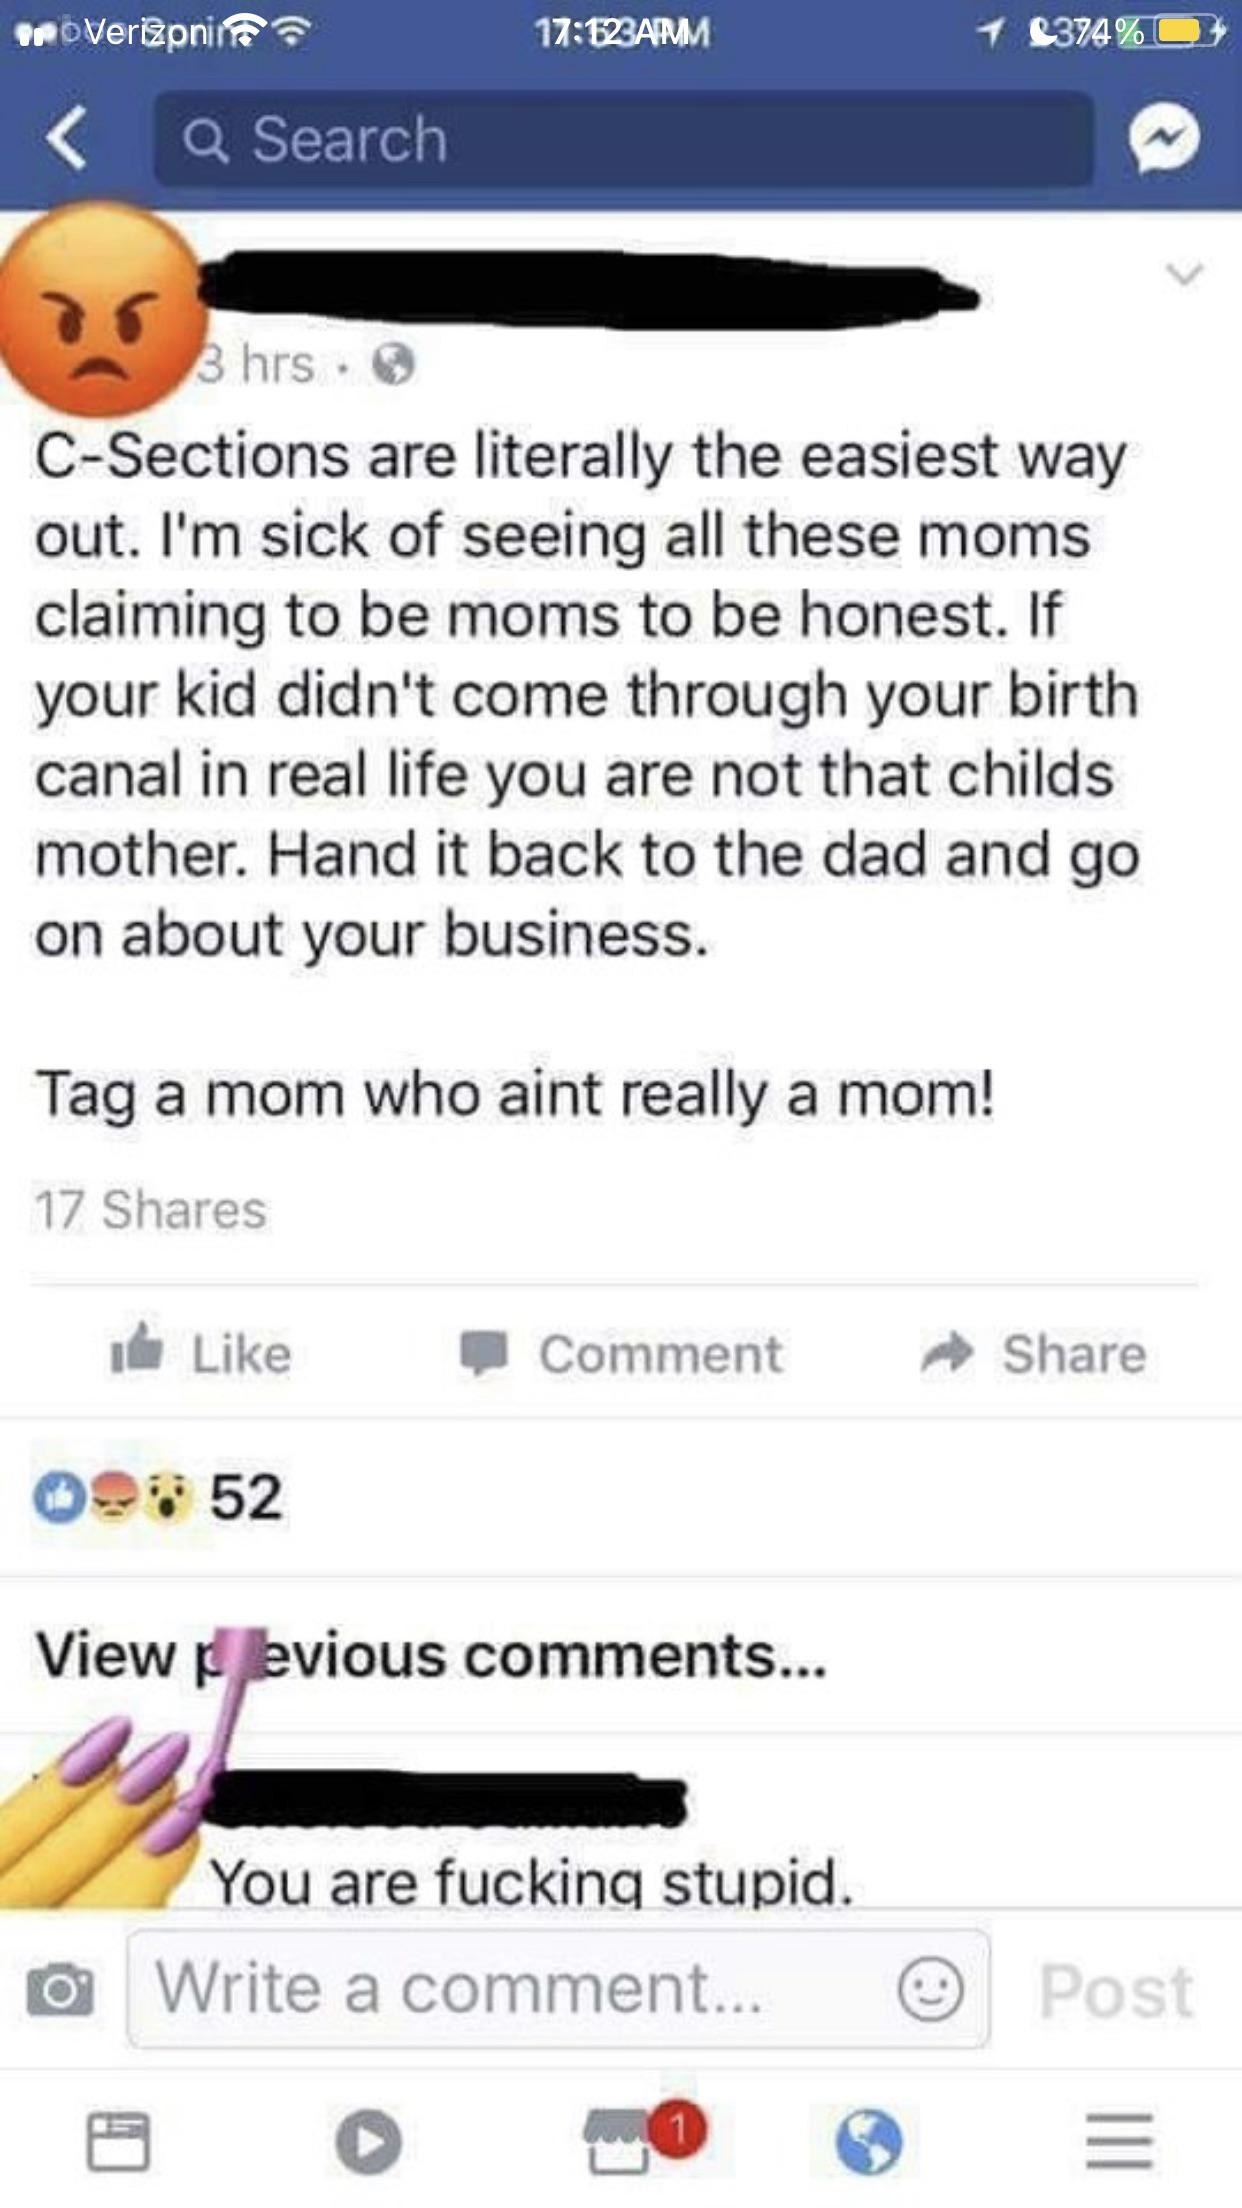 &quot;Tag a mom who really ain&#x27;t a mom.&quot;